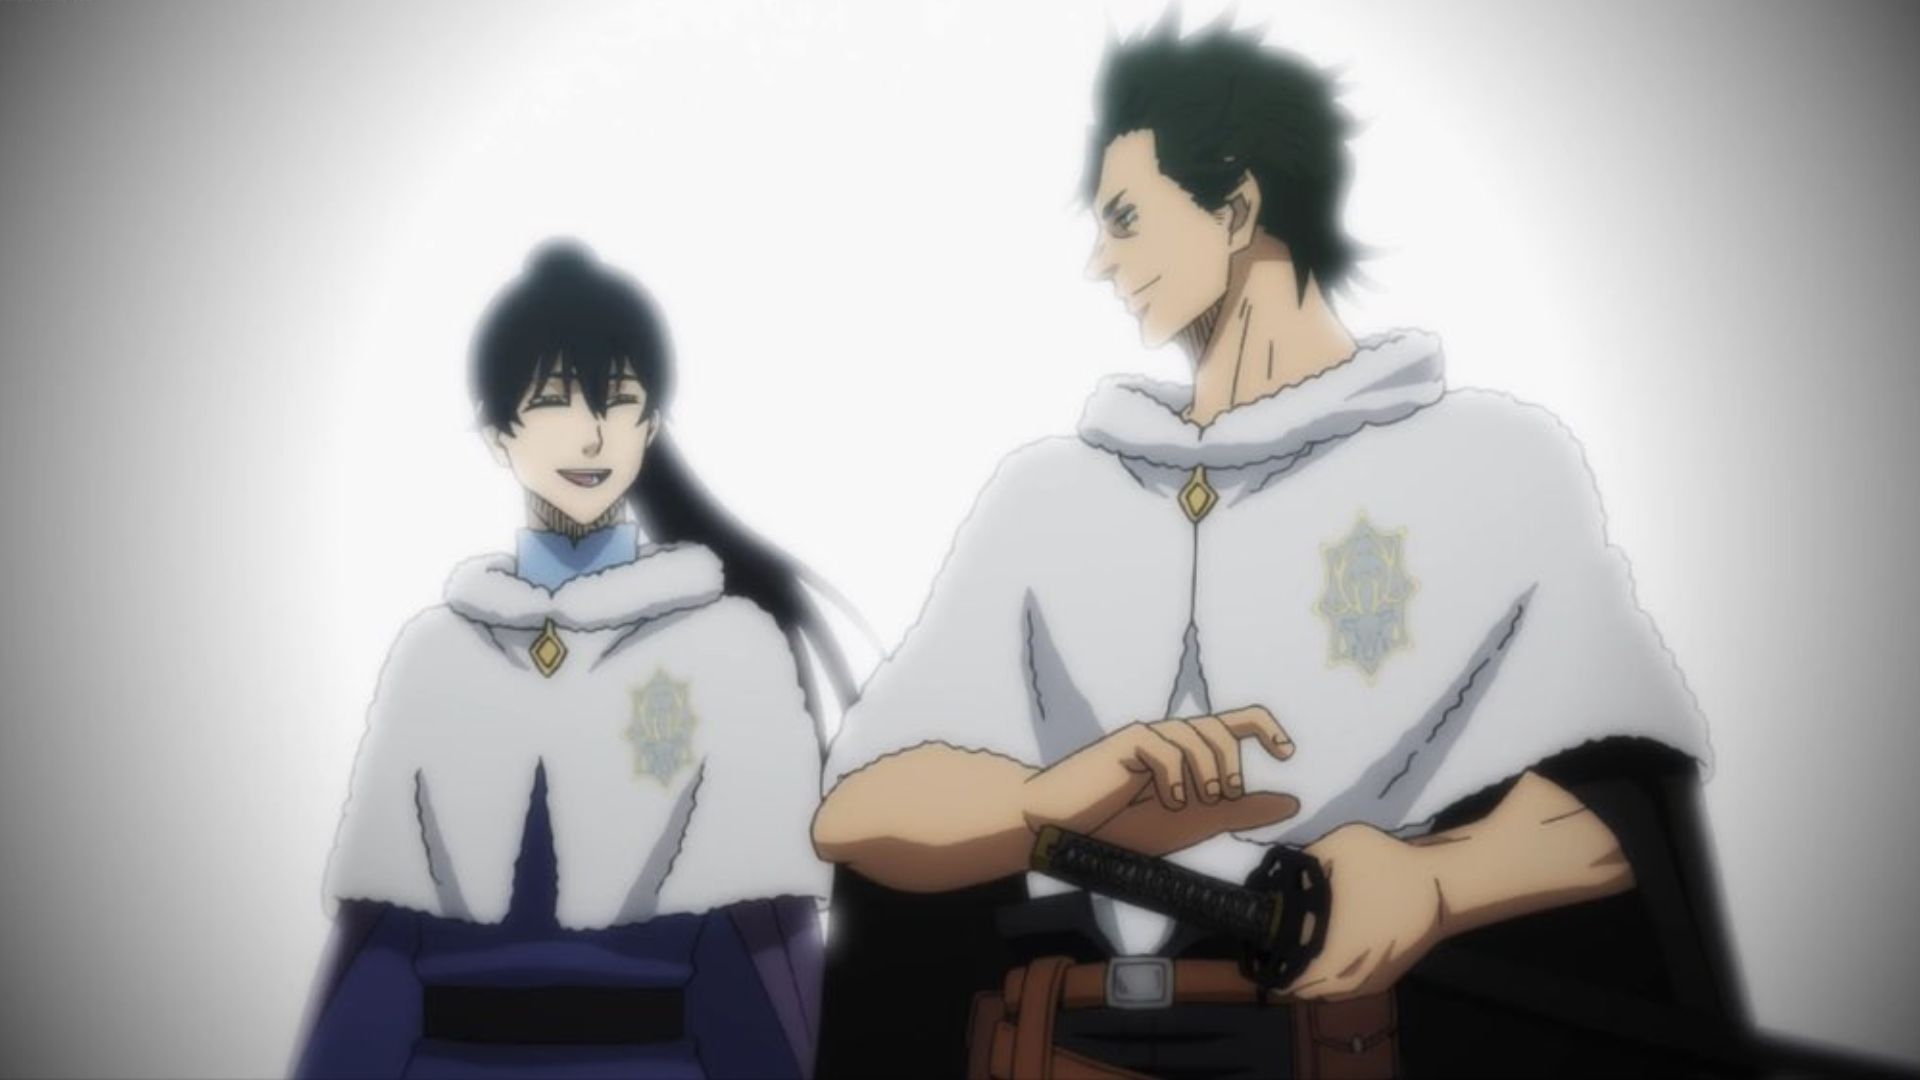 Morgen and Yami as seen in the Black Clover anime (Image via Studio Pierrot)